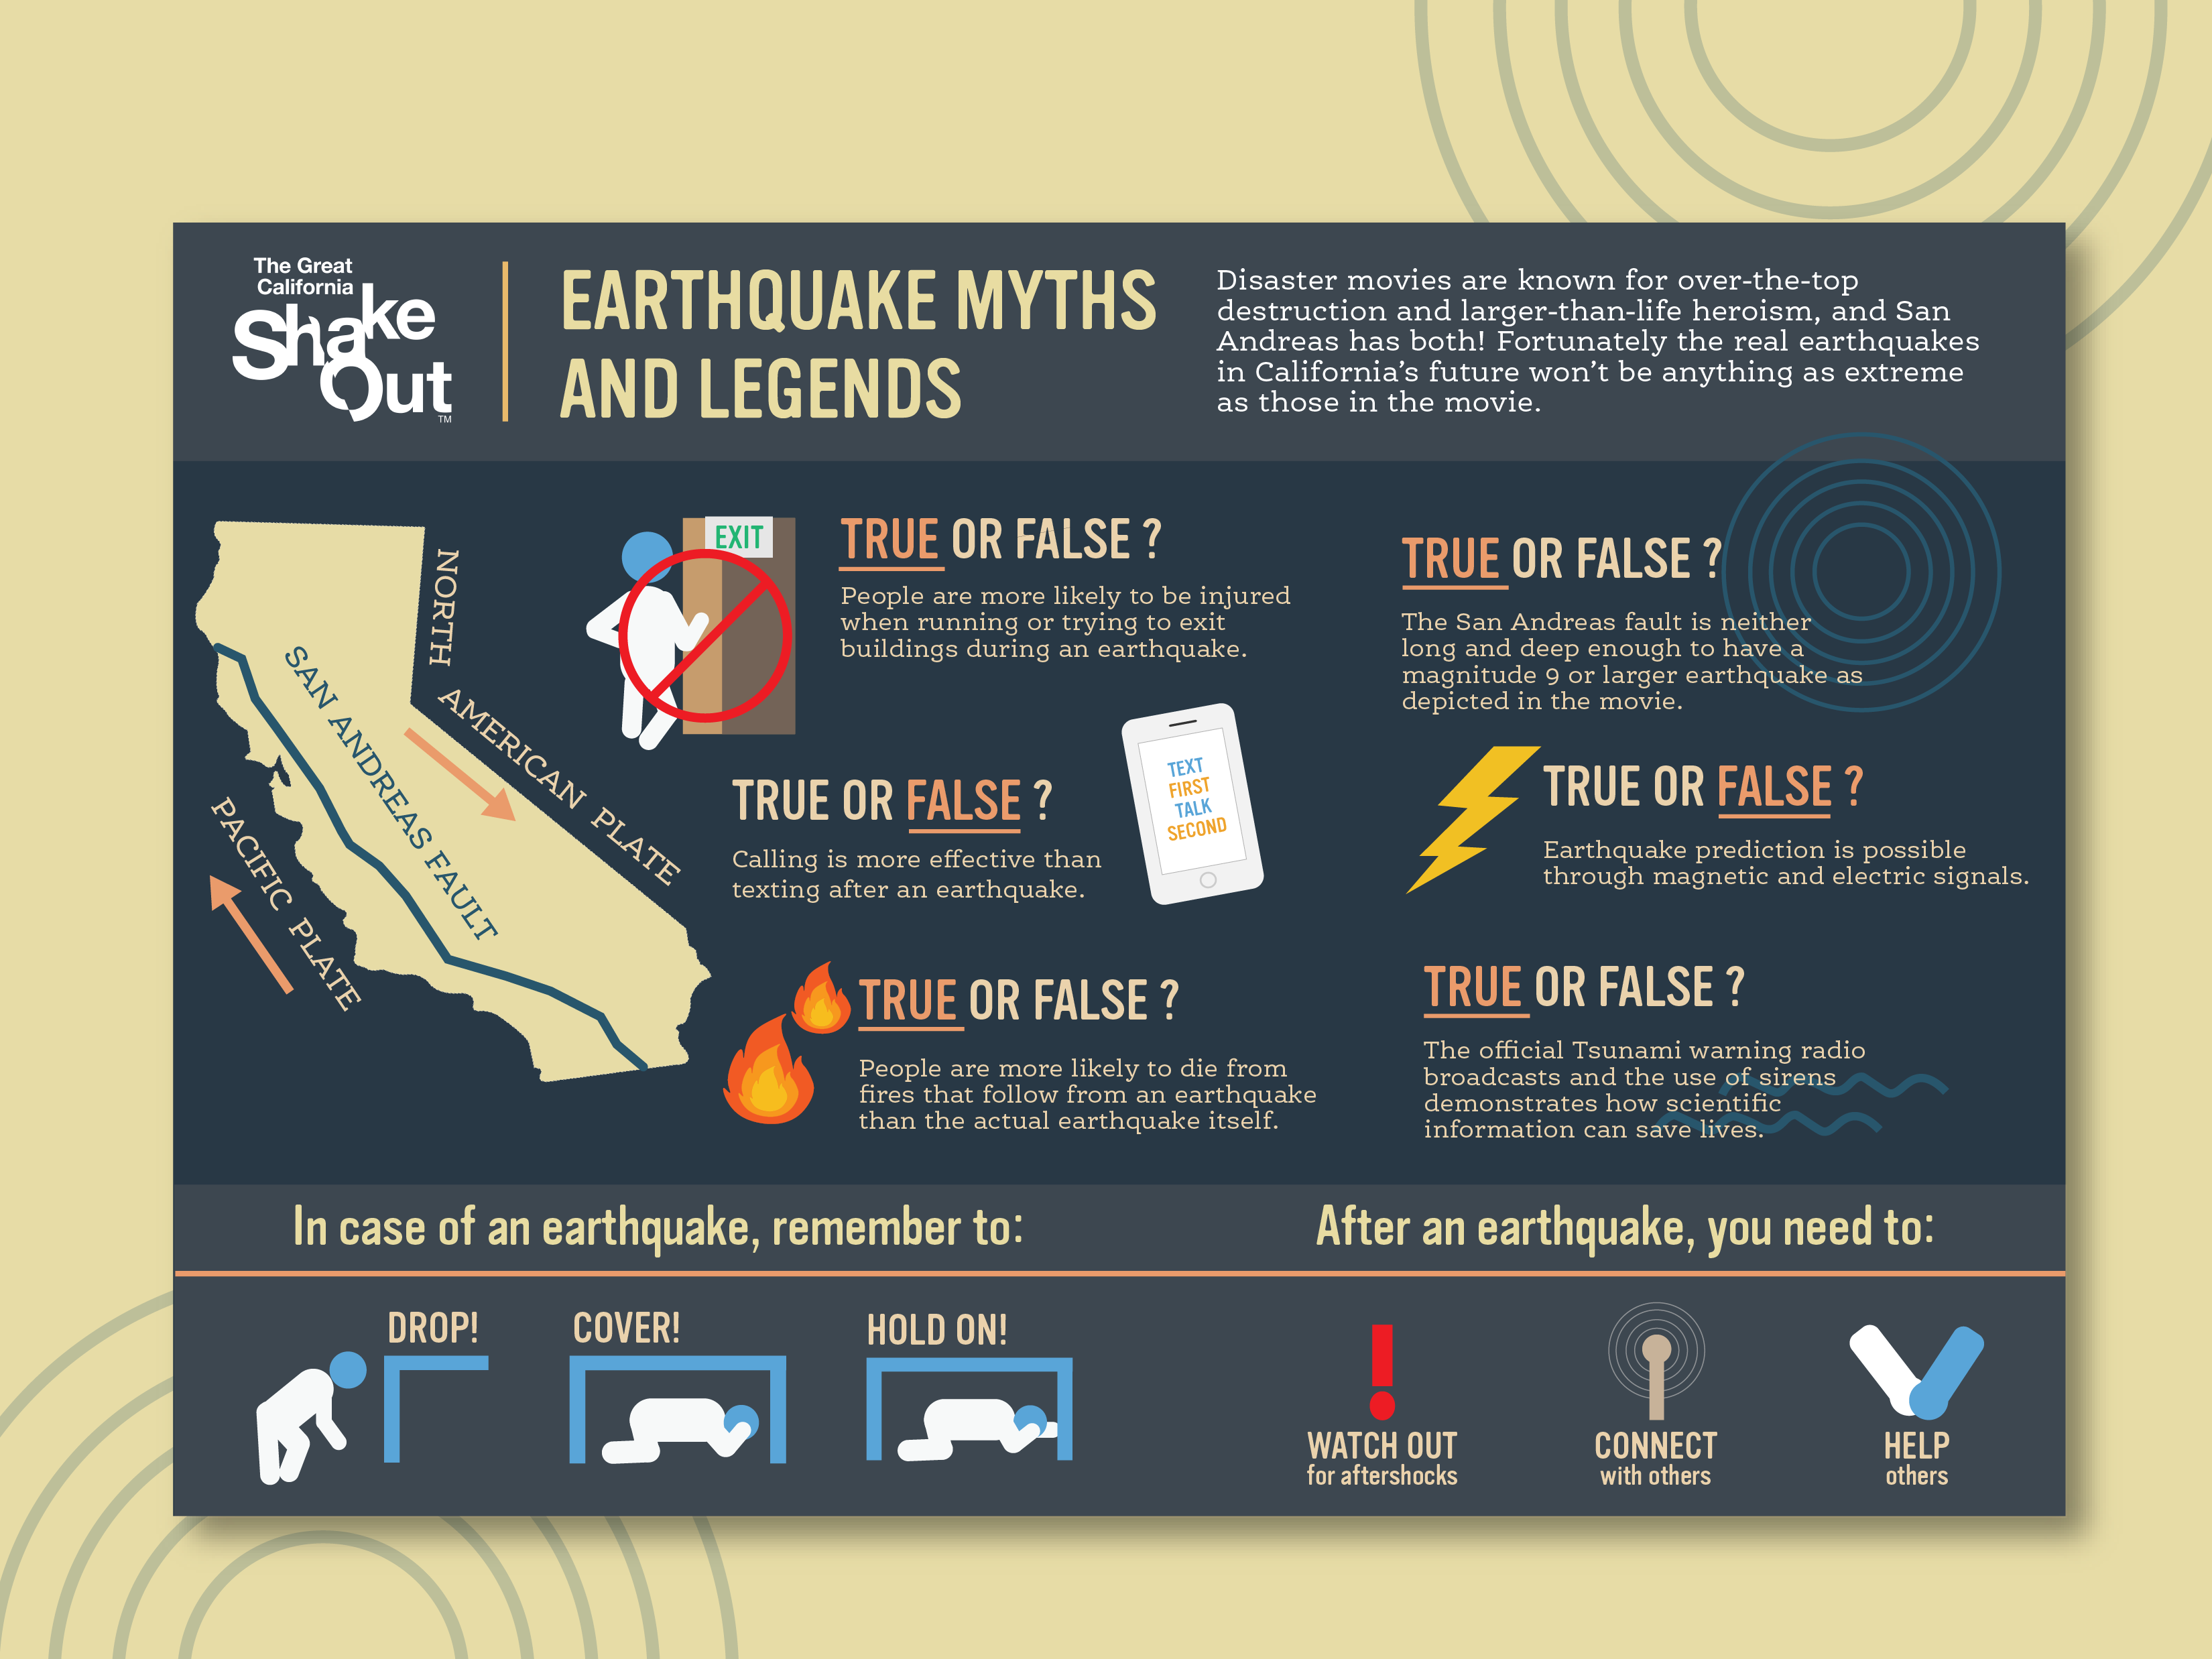 The Great California Shakeout Infographic by Riri Tamura on Dribbble